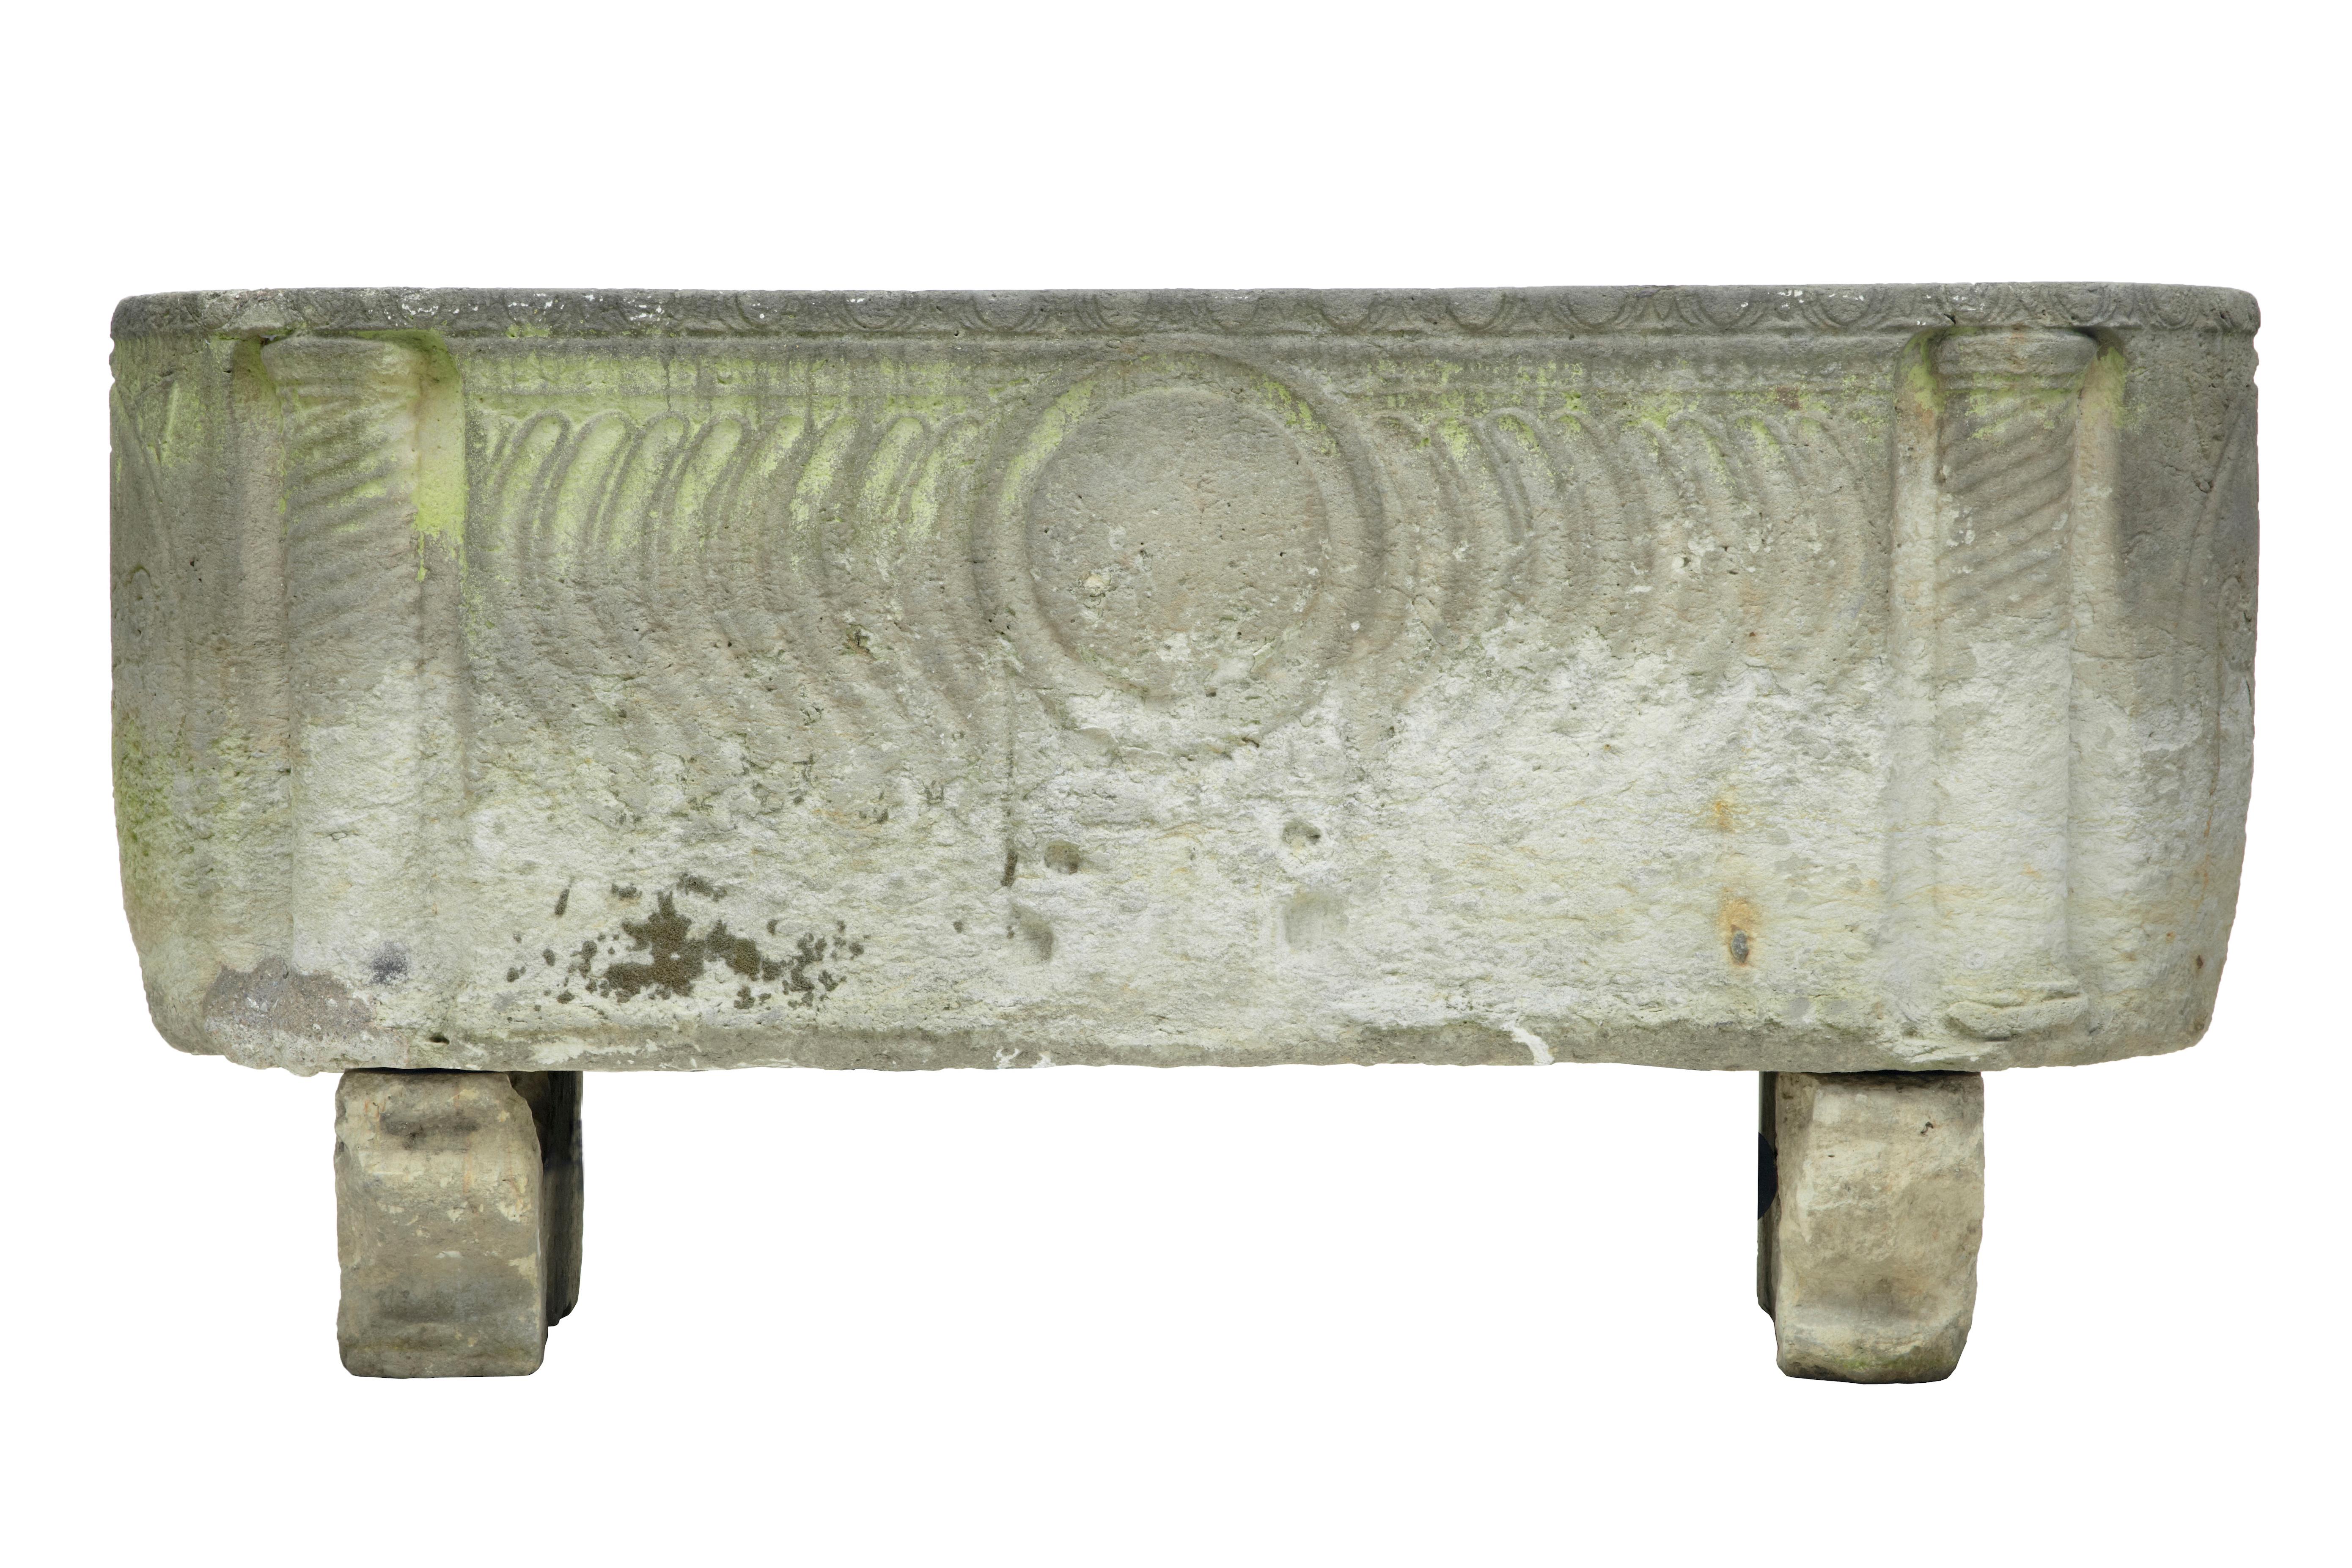 circa 250 AD. A stunning Anglo Roman sarcophagus in limestone, sitting on sledge feet and having curved strigilated side carvings with warrior shield and two crossed arrow symbols at each end.This unique piece was discovered in a Copenhagen garden.